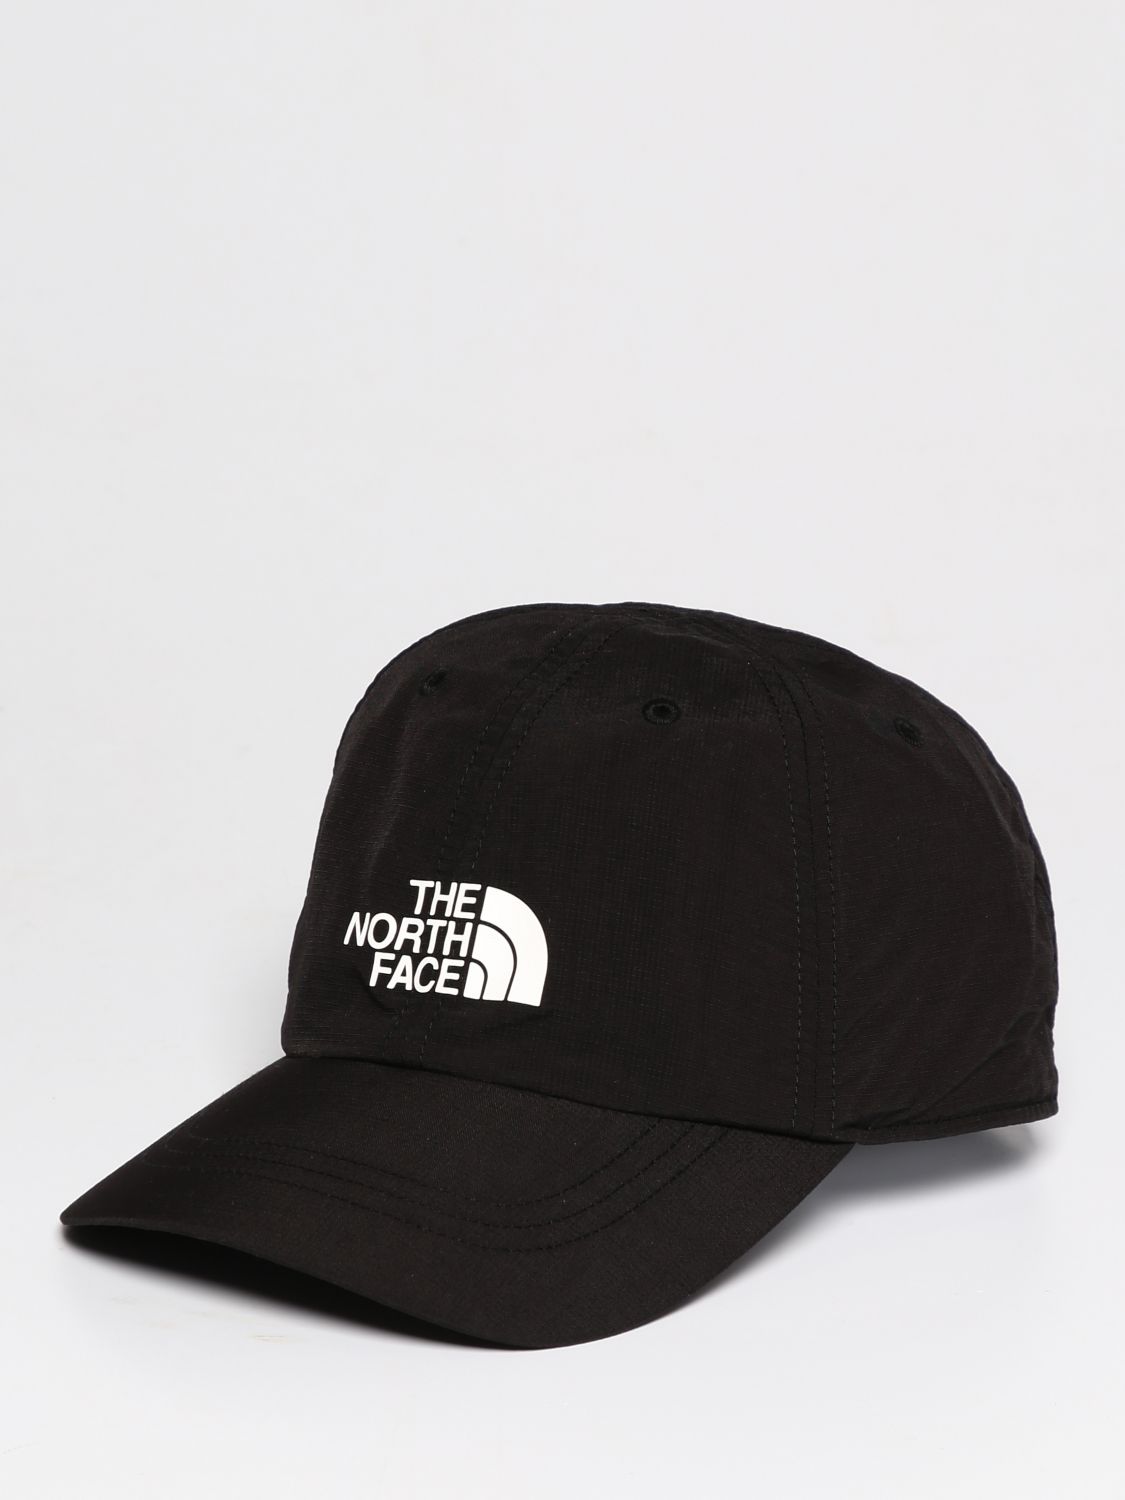 THE NORTH FACE: hat for man - Black | The North Face hat NF0A5FXL ...